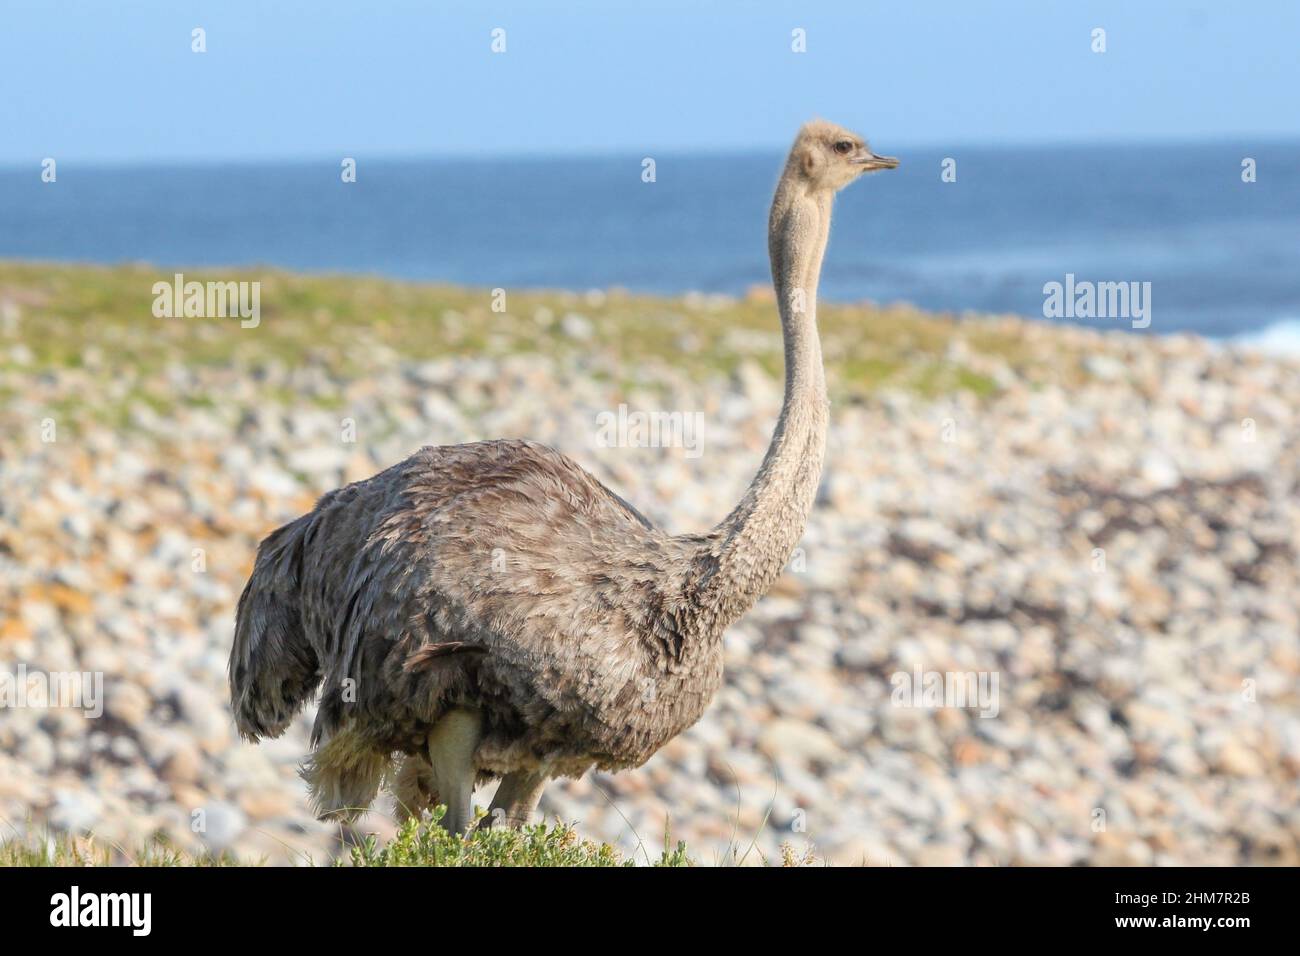 Common Ostrich at the Cape of Good Hope in the Western Cape of South Africa Stock Photo